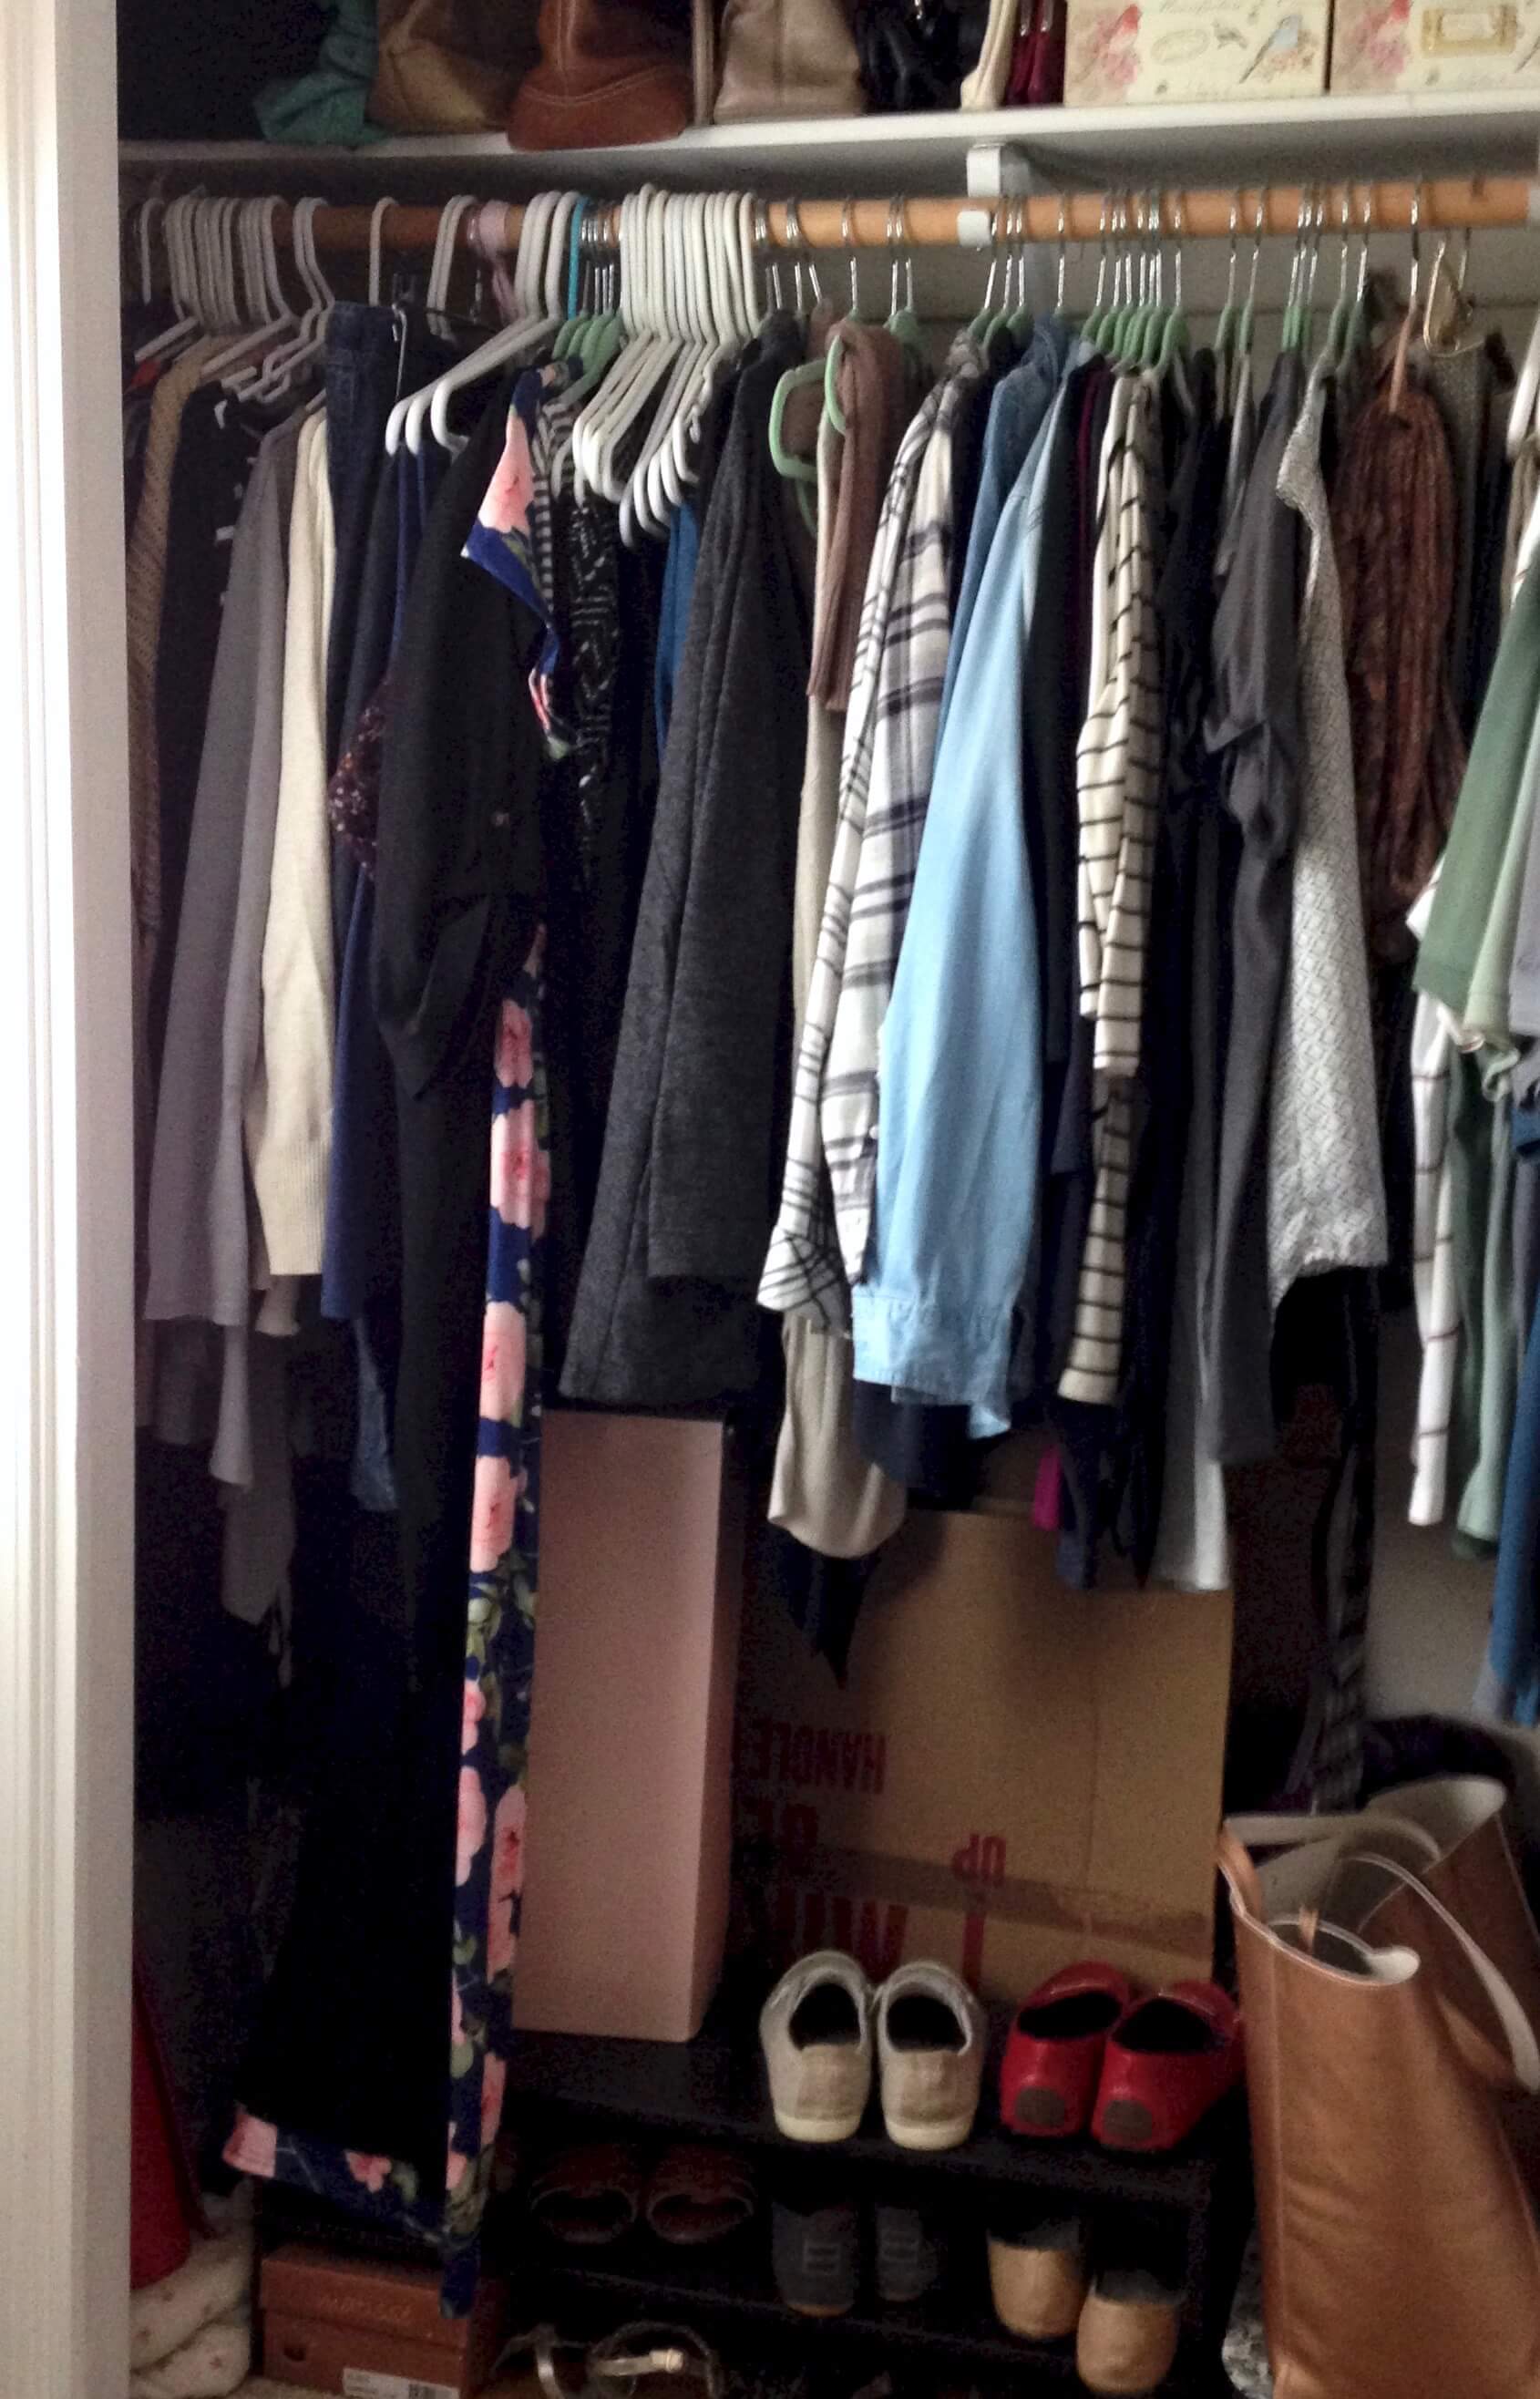 How a stay-at-home mom of 4 totally transformed her closet and turned it into pieces and outfits that work for her body shape, coloring, and style. I love the inspiration this course can give. I would love to have a wardrobe that worked seamlessly for me! #mom #momlife #fashion #outfits #tips # ideas #easy #clothes #style #howto #momstyle #capsule #bodyimage